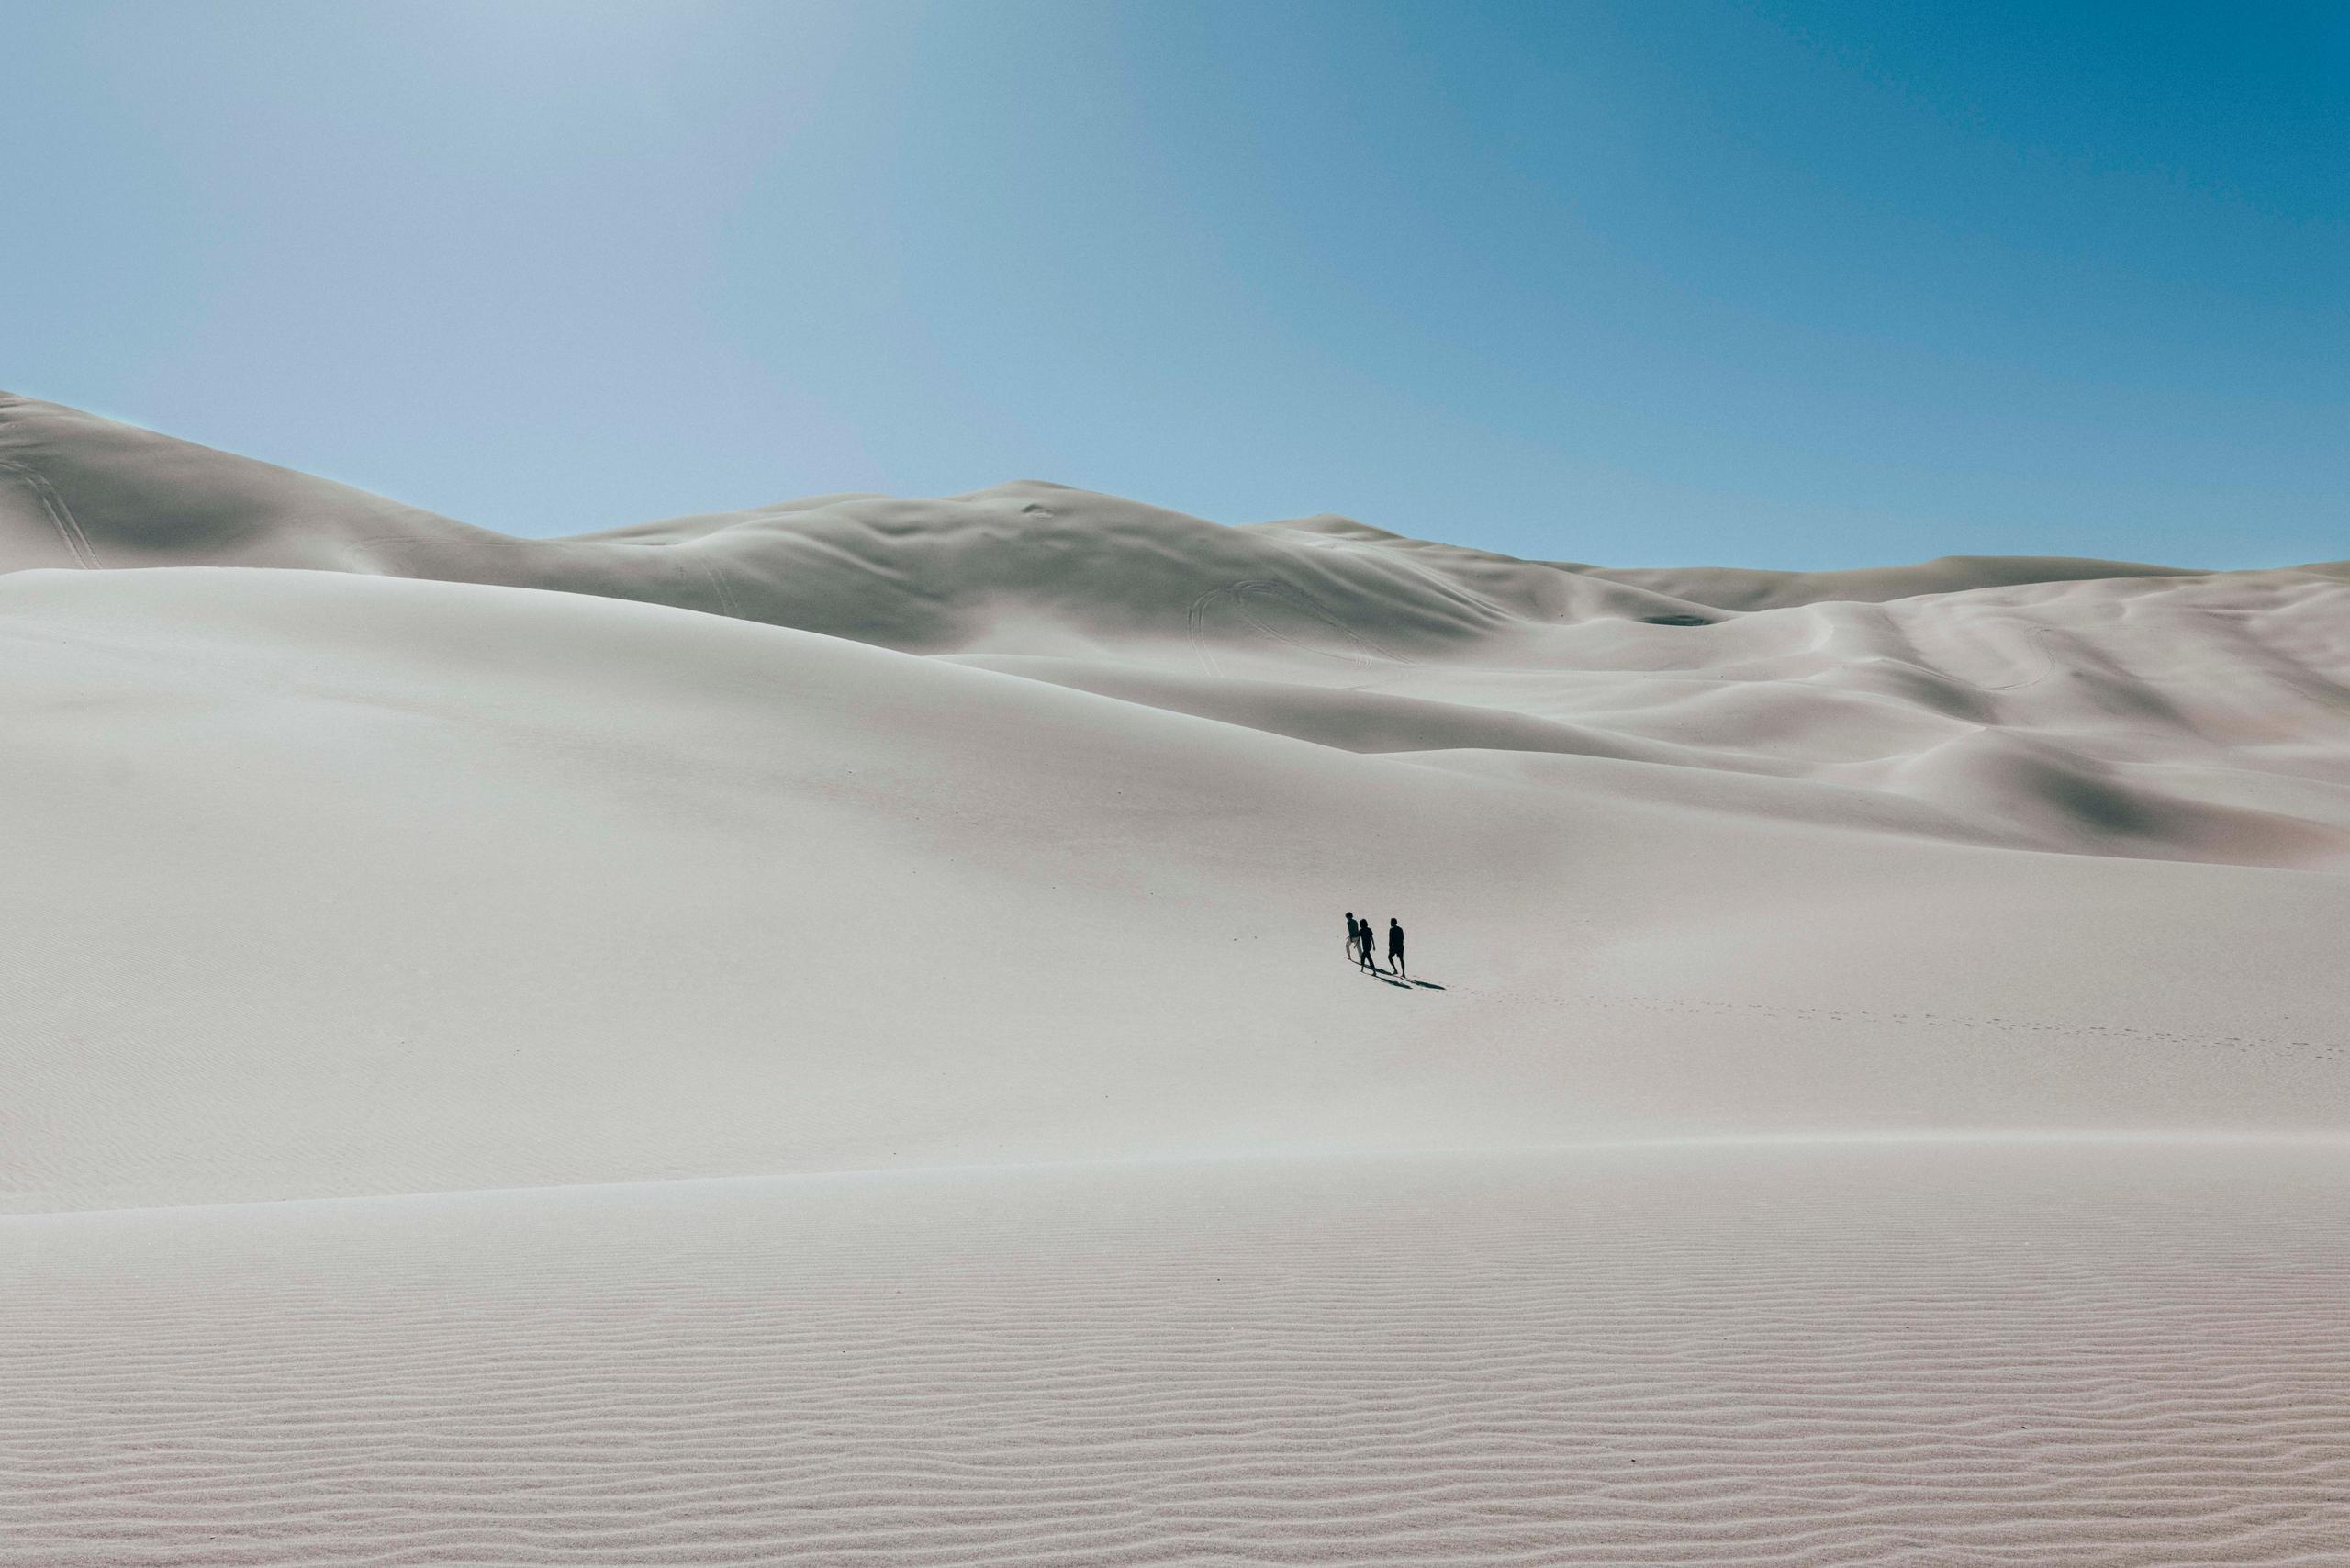 Three people walking in the distance on vast sand dunes landscape